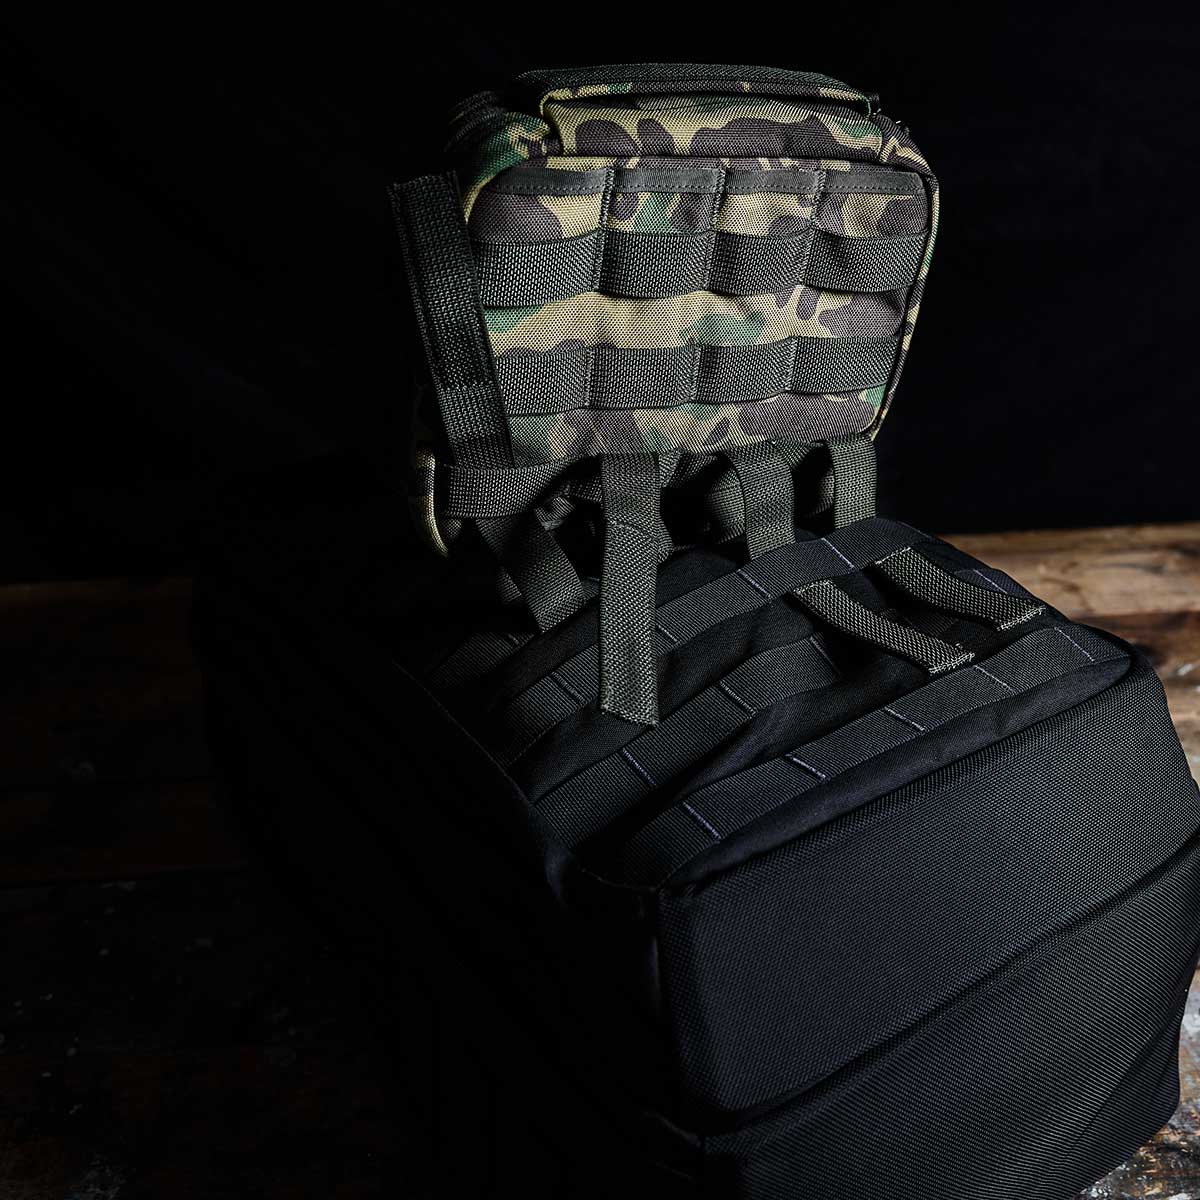 The GORUCK GR2 is a great backpack, but it's a premium backpack